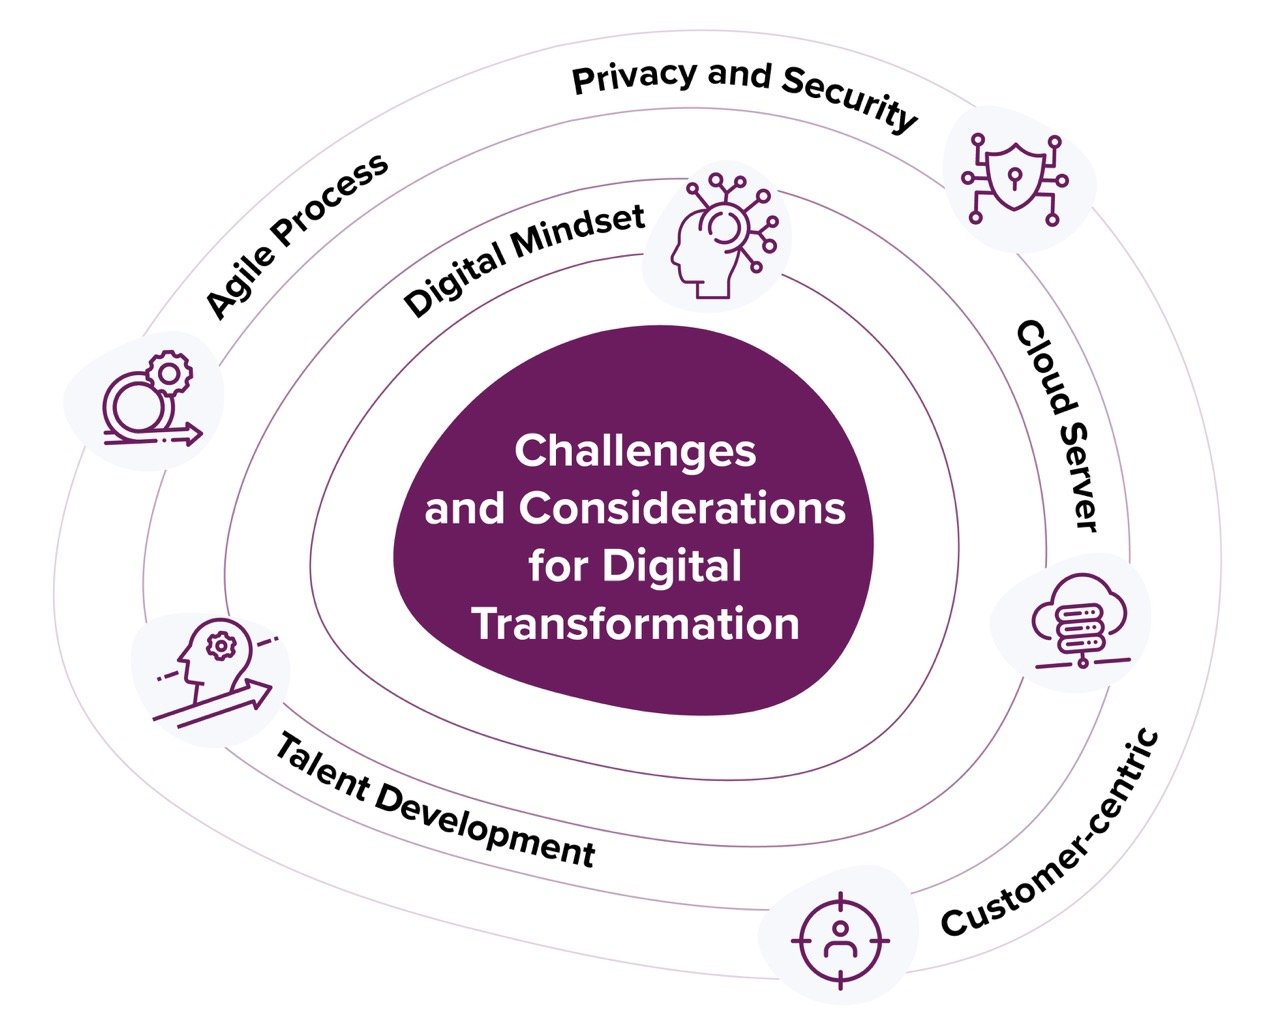 Challenges and considerations for digital transformation